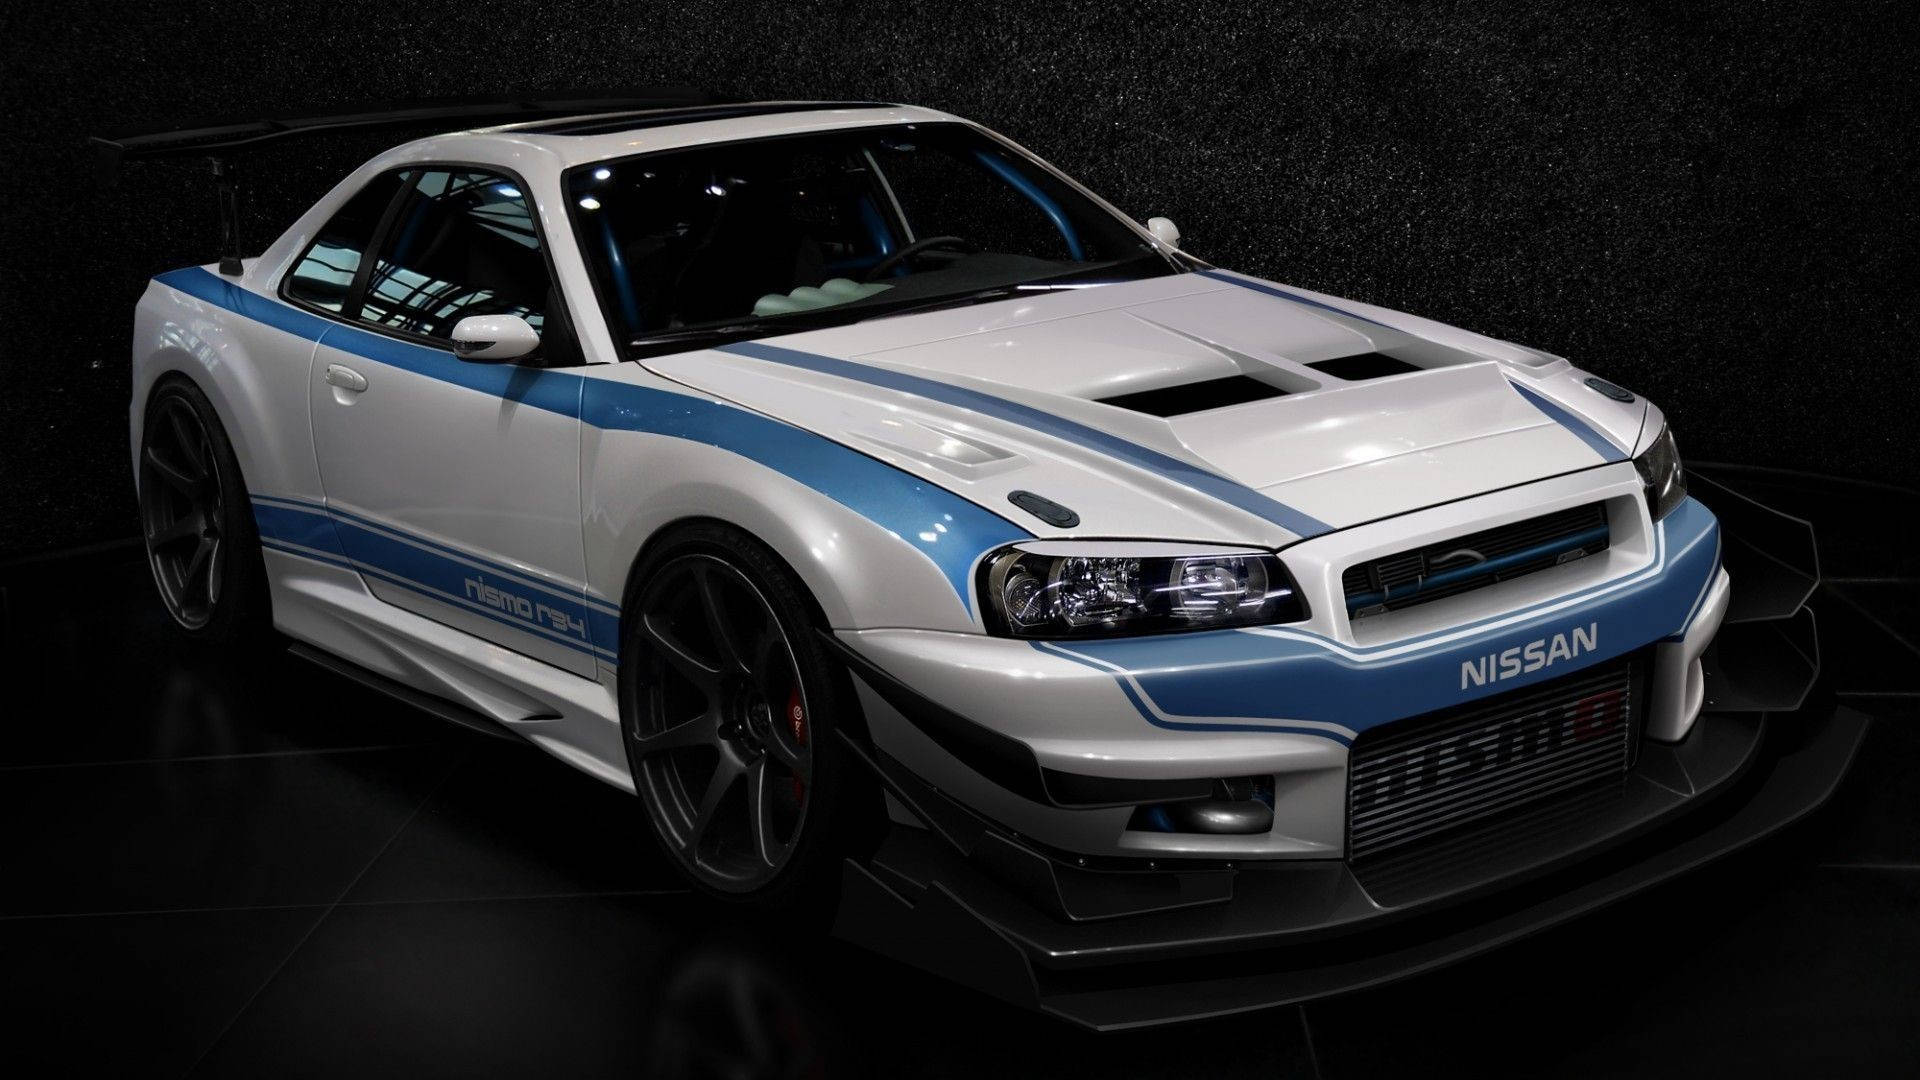 Blue And White Nissan Skyline Car Background